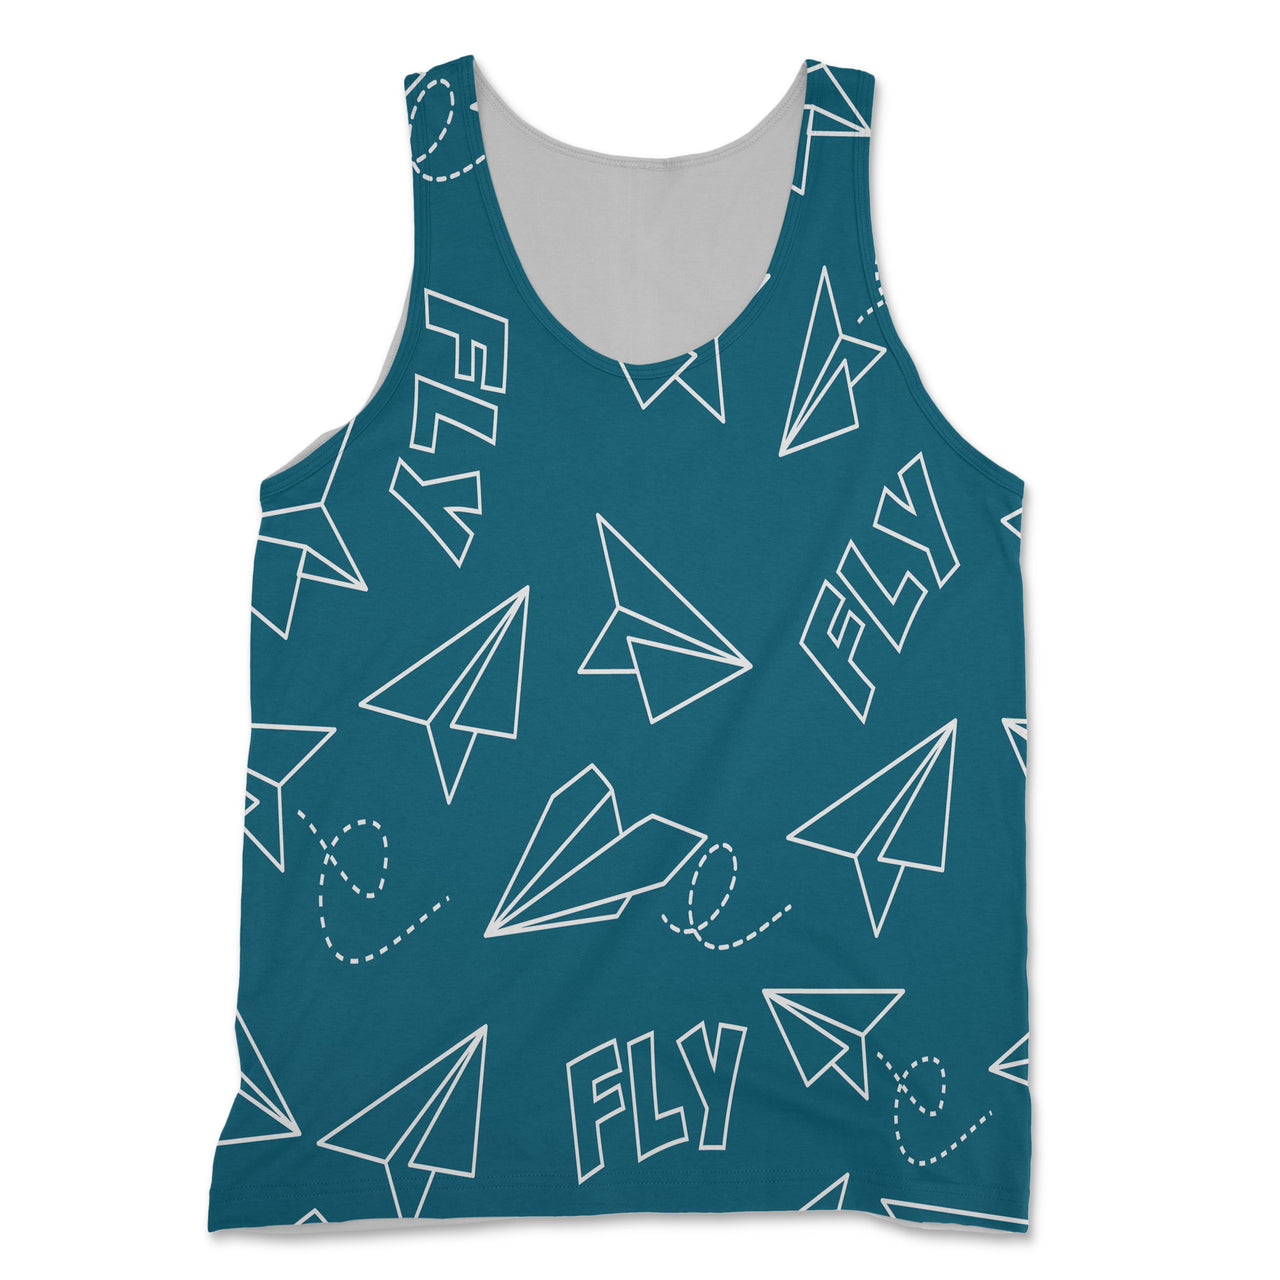 Paper Airplane & Fly (Green) Designed 3D Tank Tops